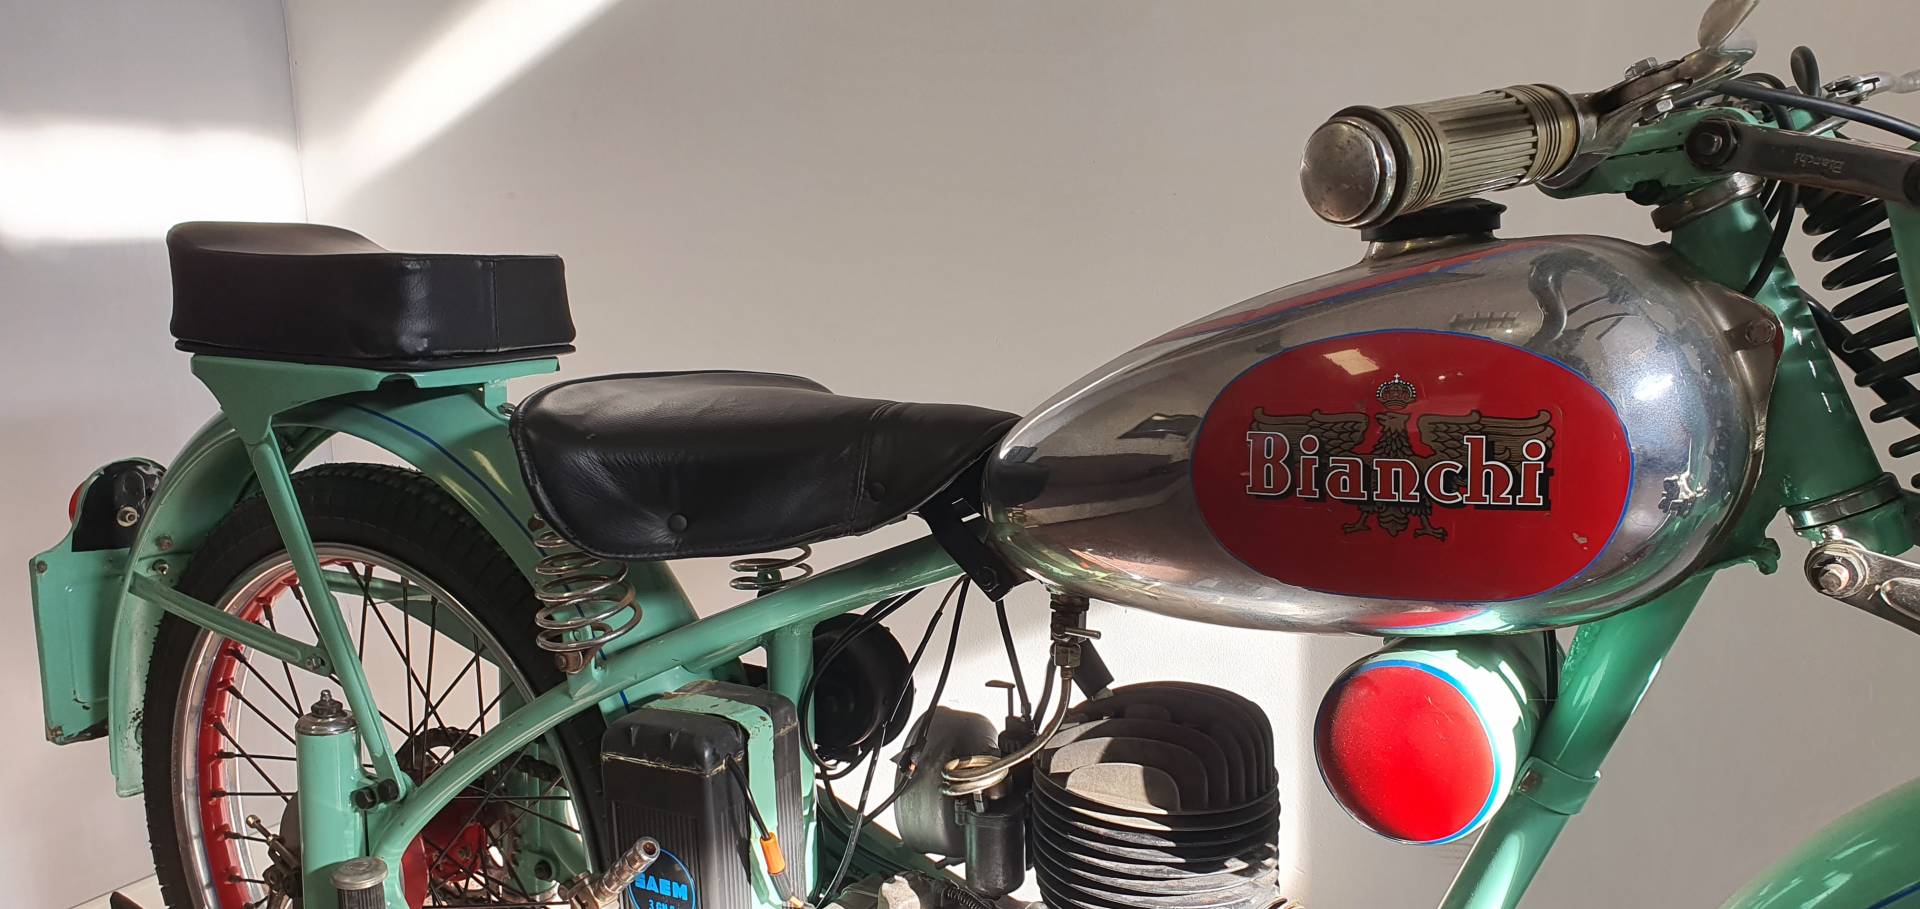 For Sale: Bianchi Bianchina 125 (1951) offered for GBP 4,091